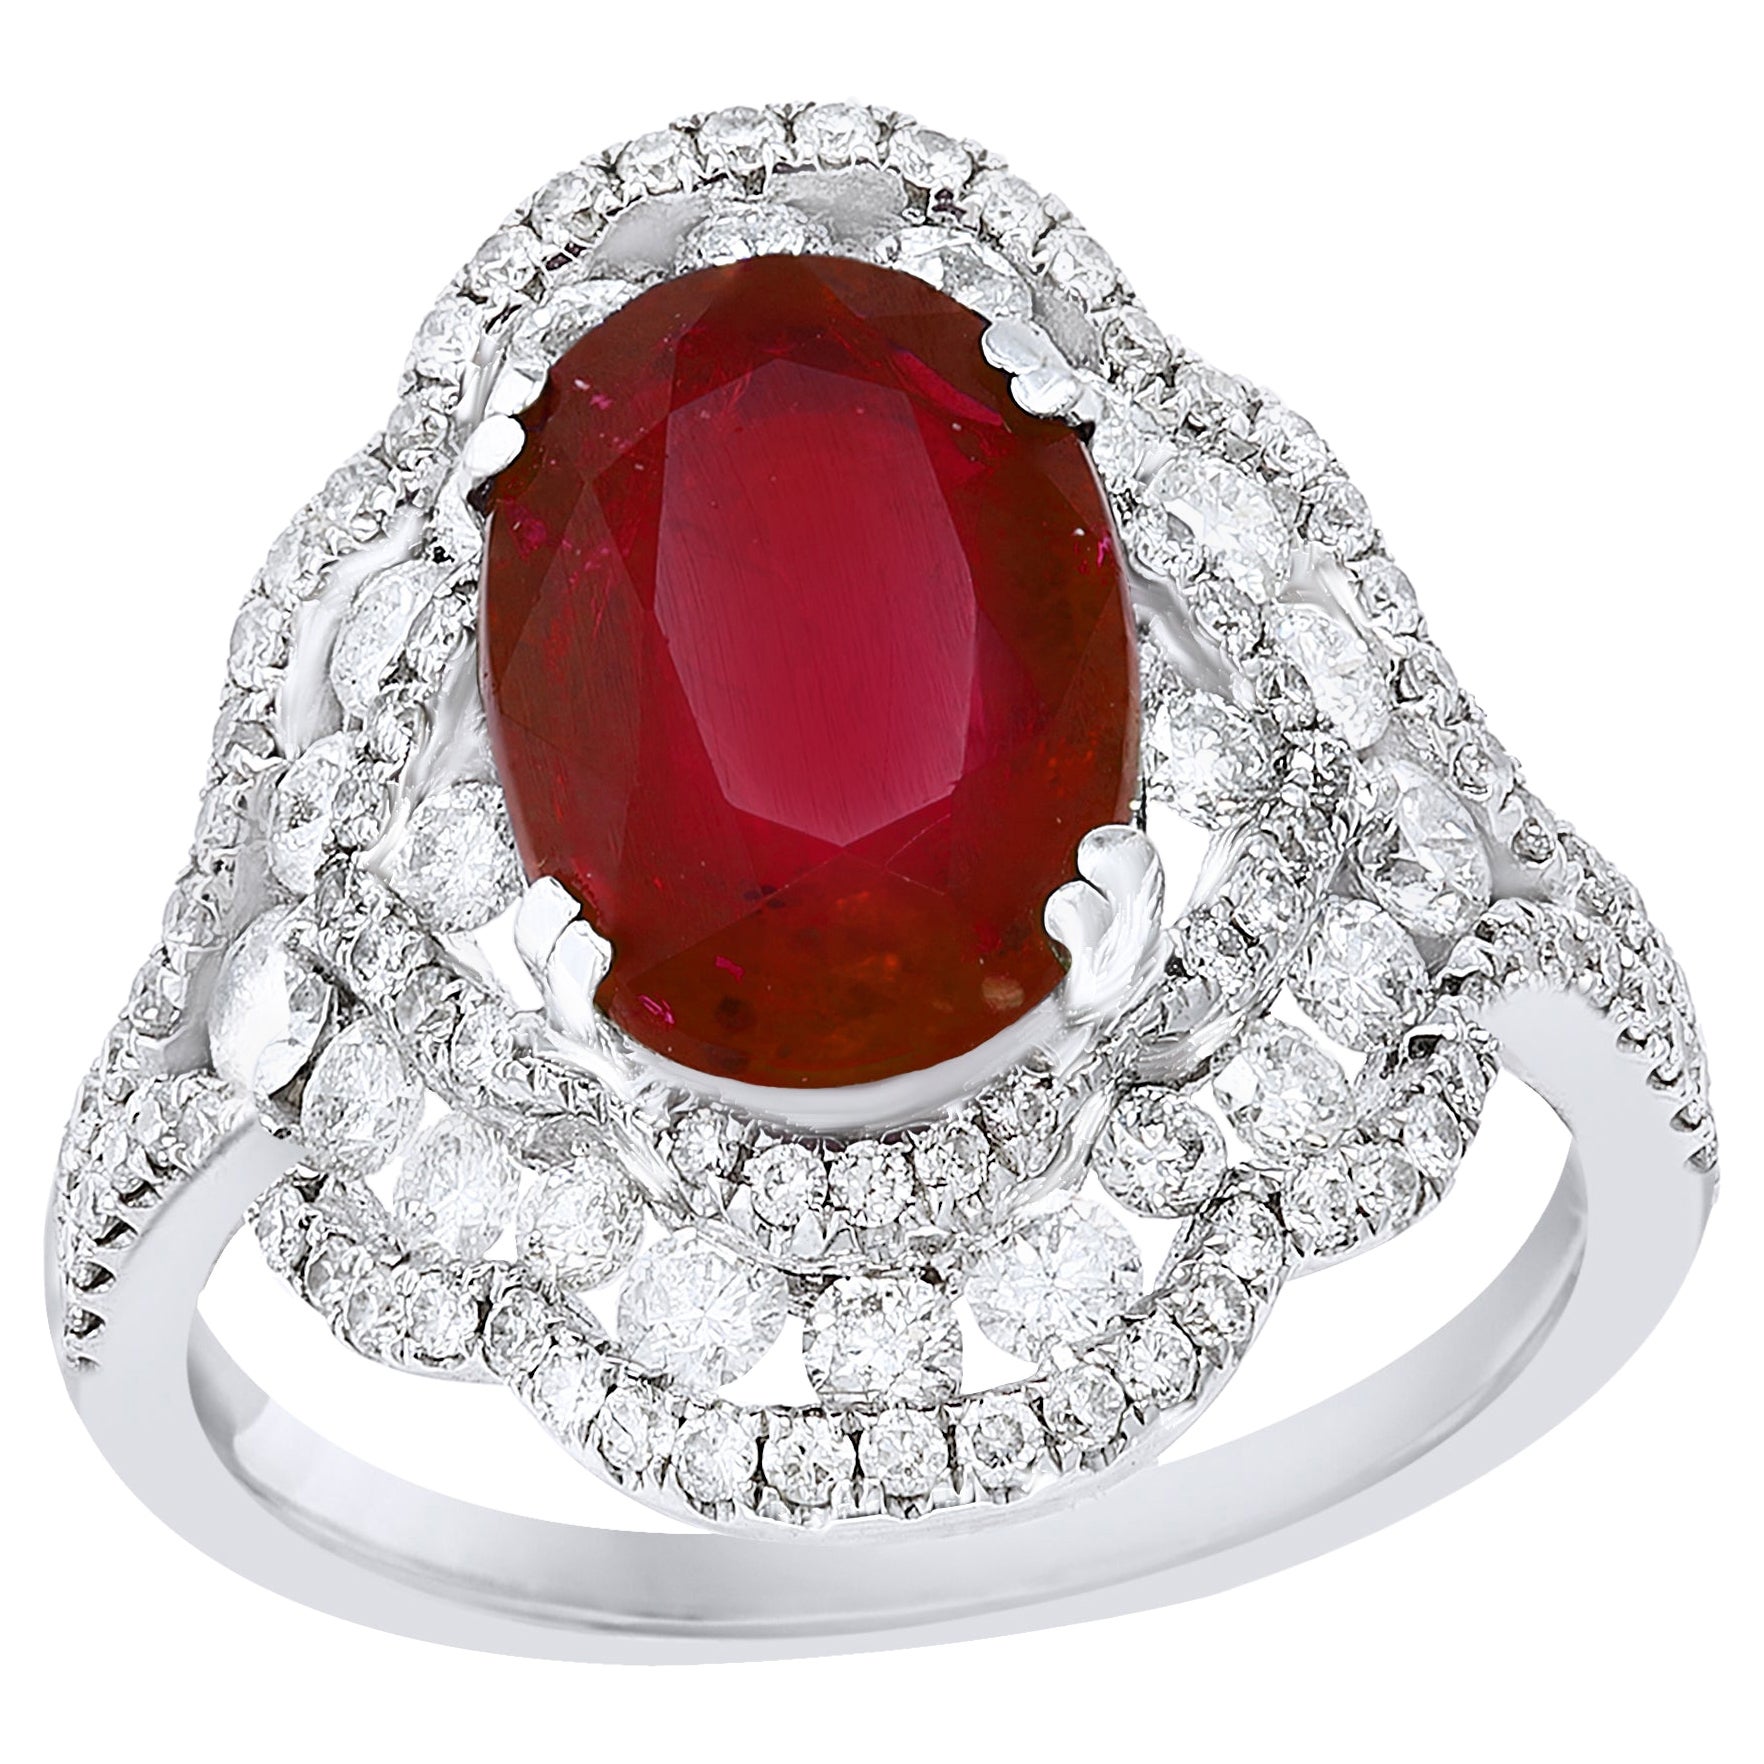 3.06 Carat Oval Ruby and Diamond Cocktail Ring in 18K White Gold